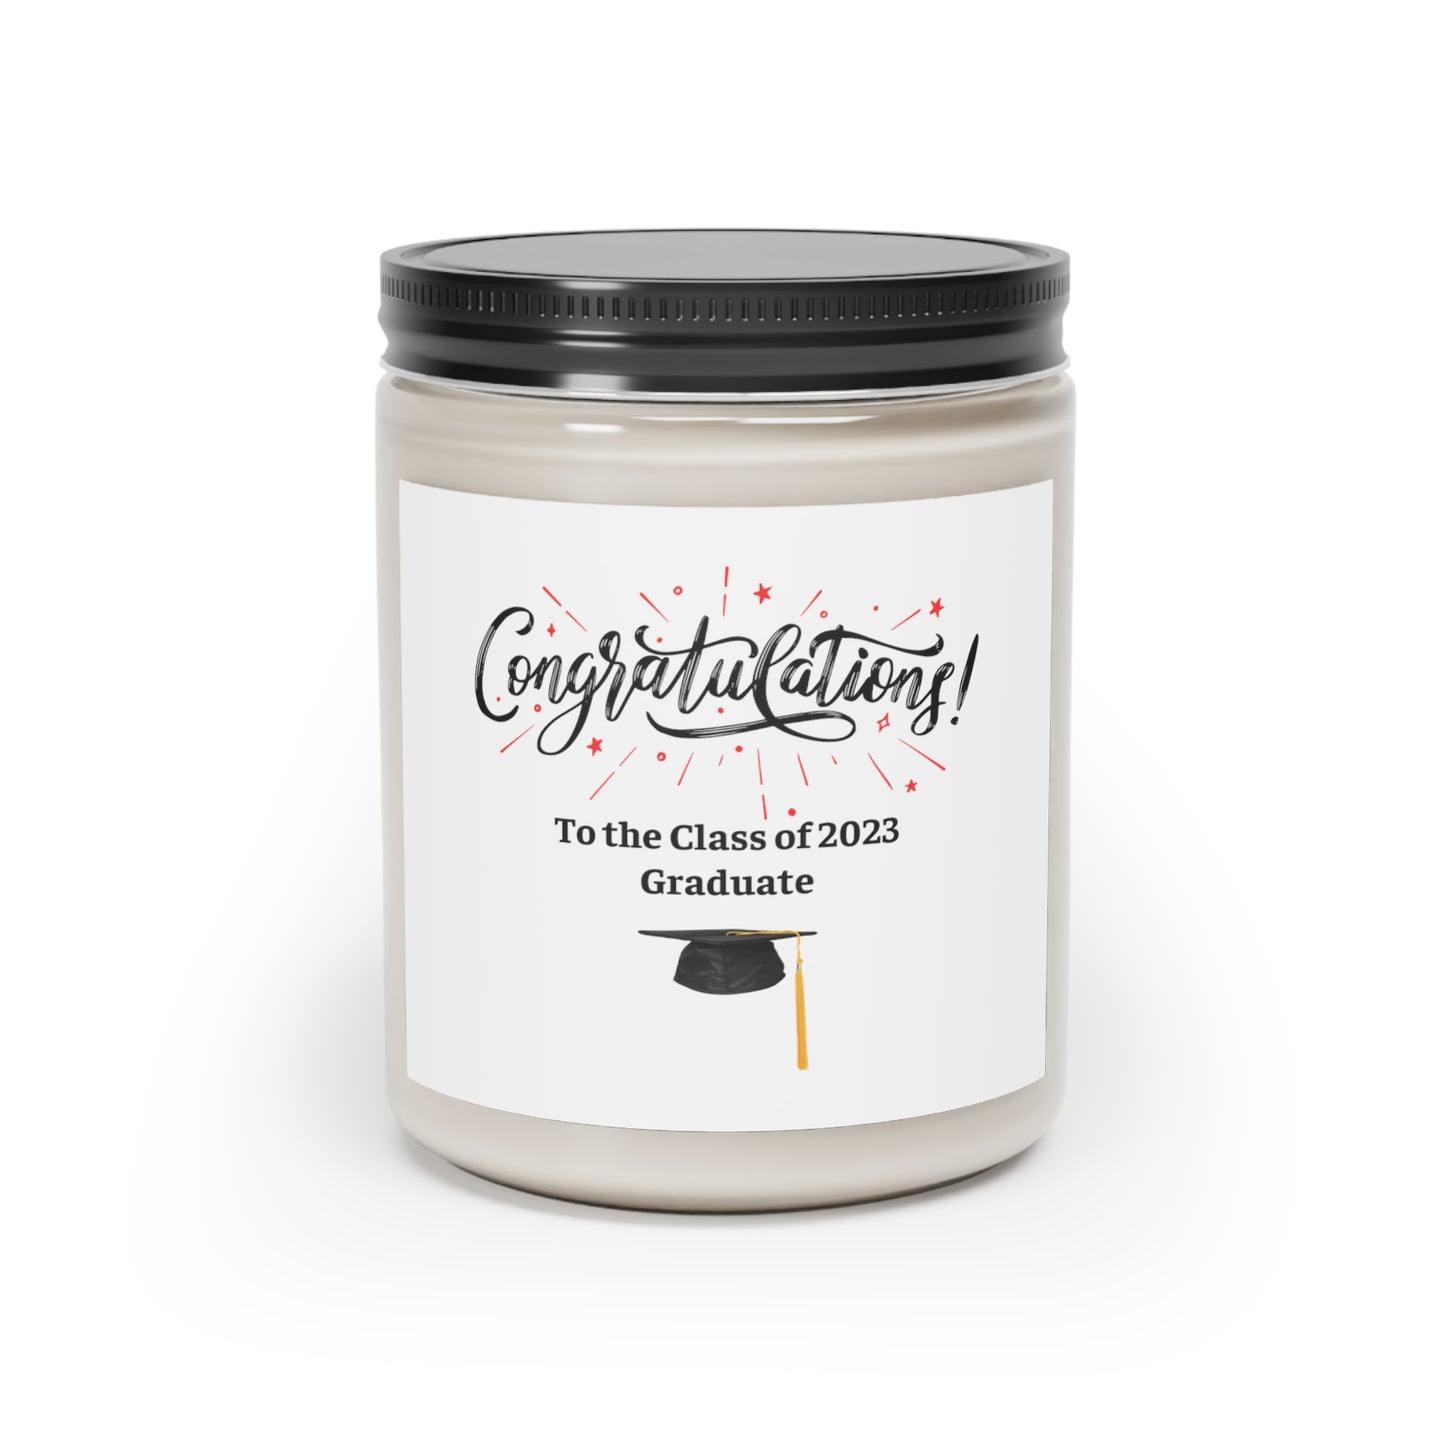 Candle for Graduate: Scented; 9 oz.; Soy wax; Glass jar